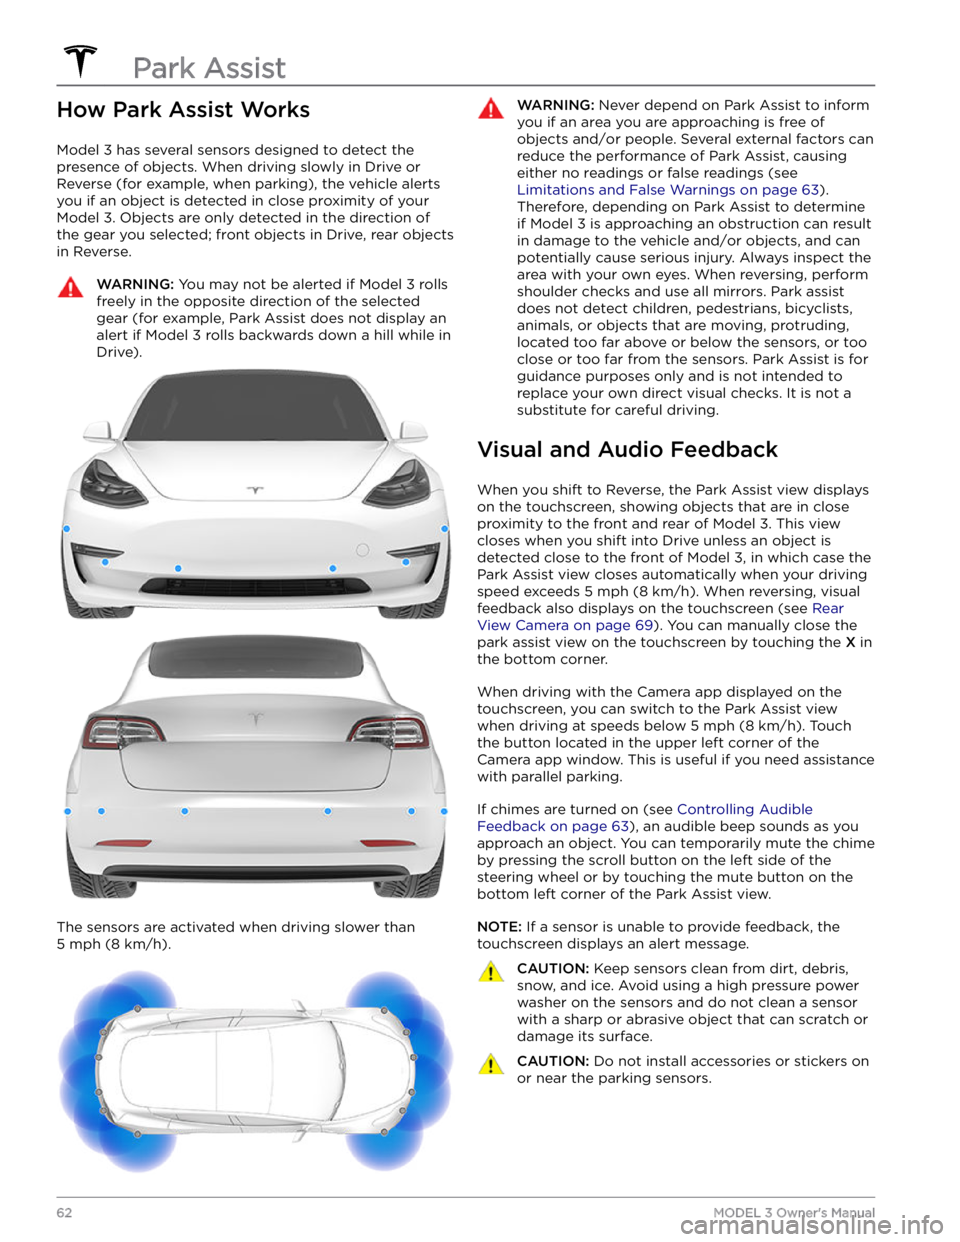 TESLA MODEL 3 2021  Owner´s Manual How Park Assist Works
Model 3 has several sensors designed to detect the 
presence of objects. When driving slowly in Drive or 
Reverse (for example, when parking), the vehicle alerts 
you if an objec